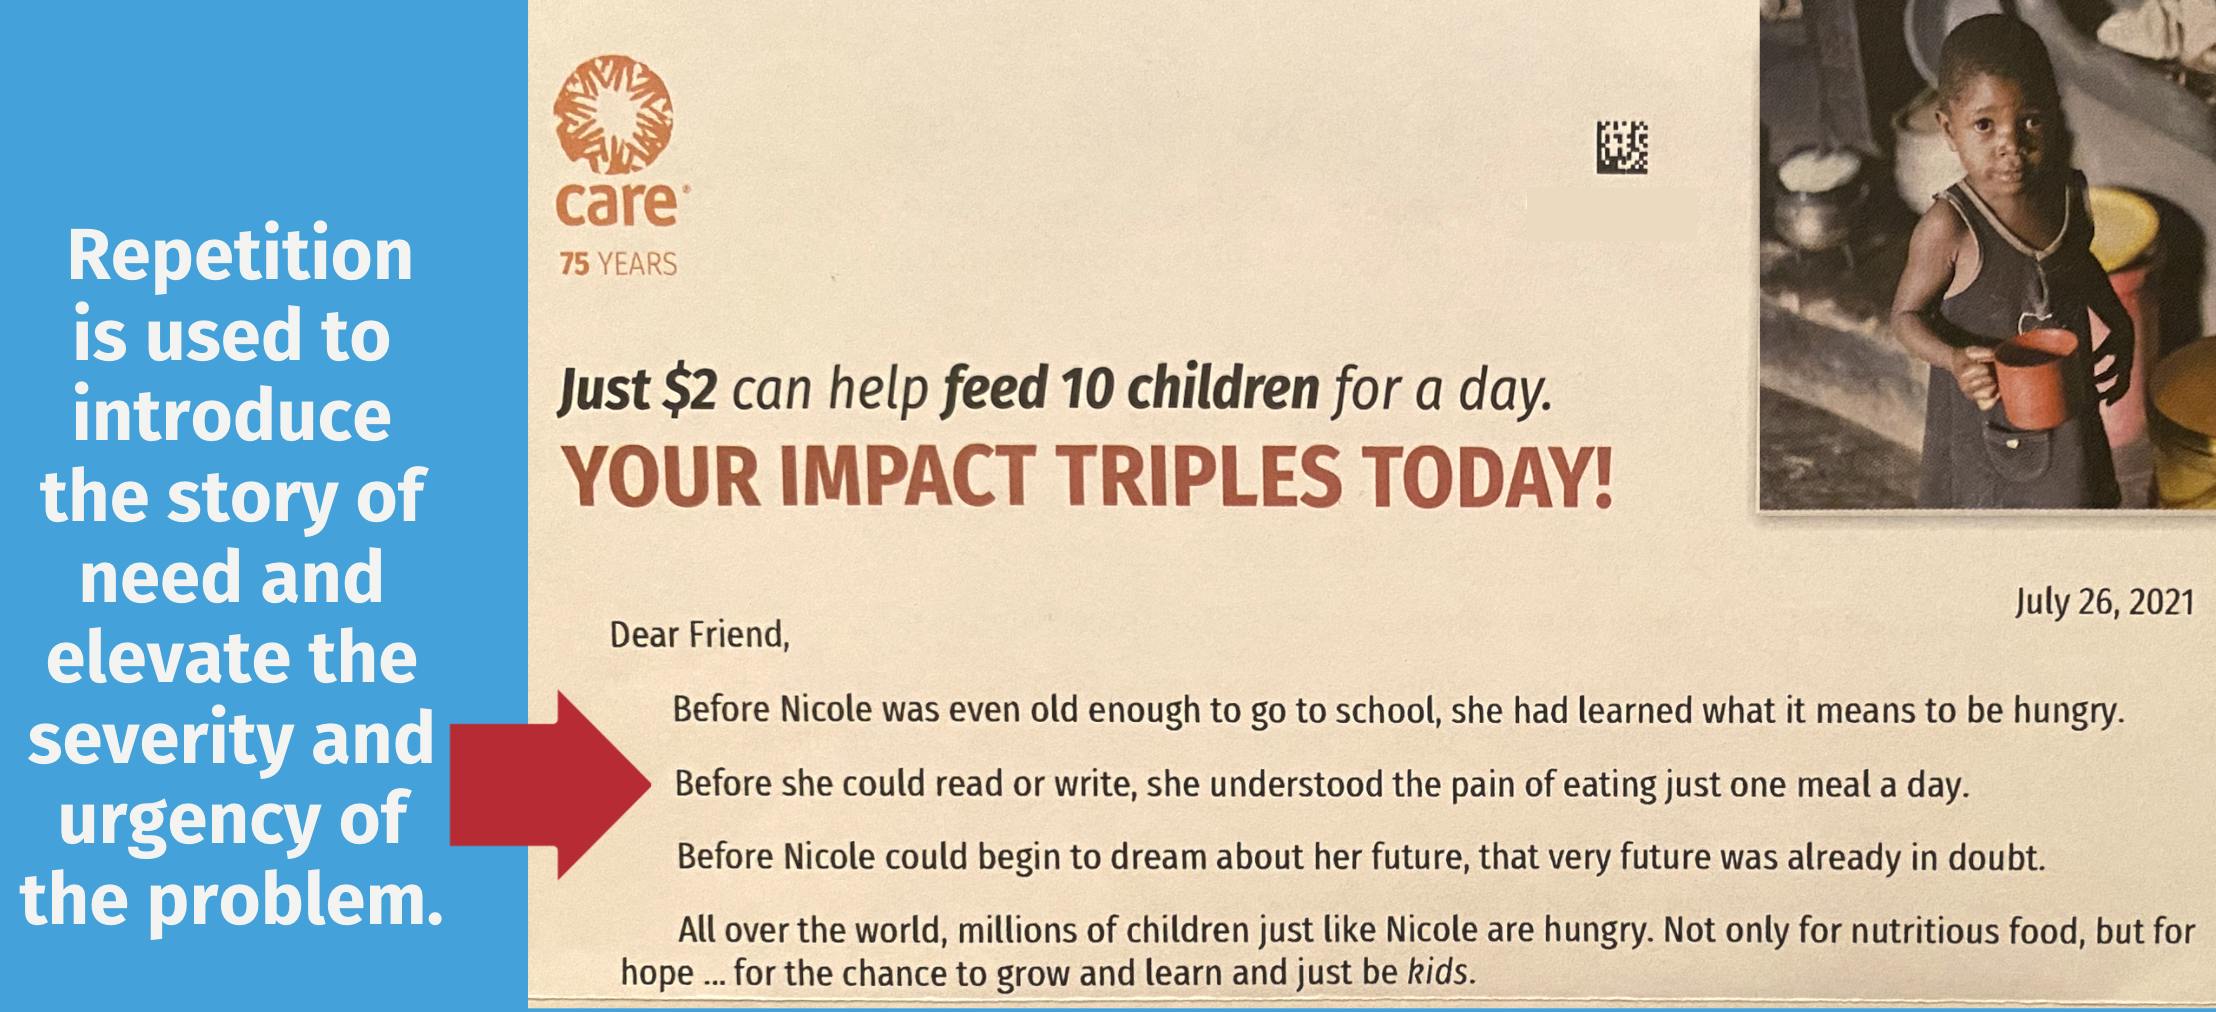 an image of an excerpt from a Care appeal. It repeats the words "before nicole" three times to elevate the severity of the problem.